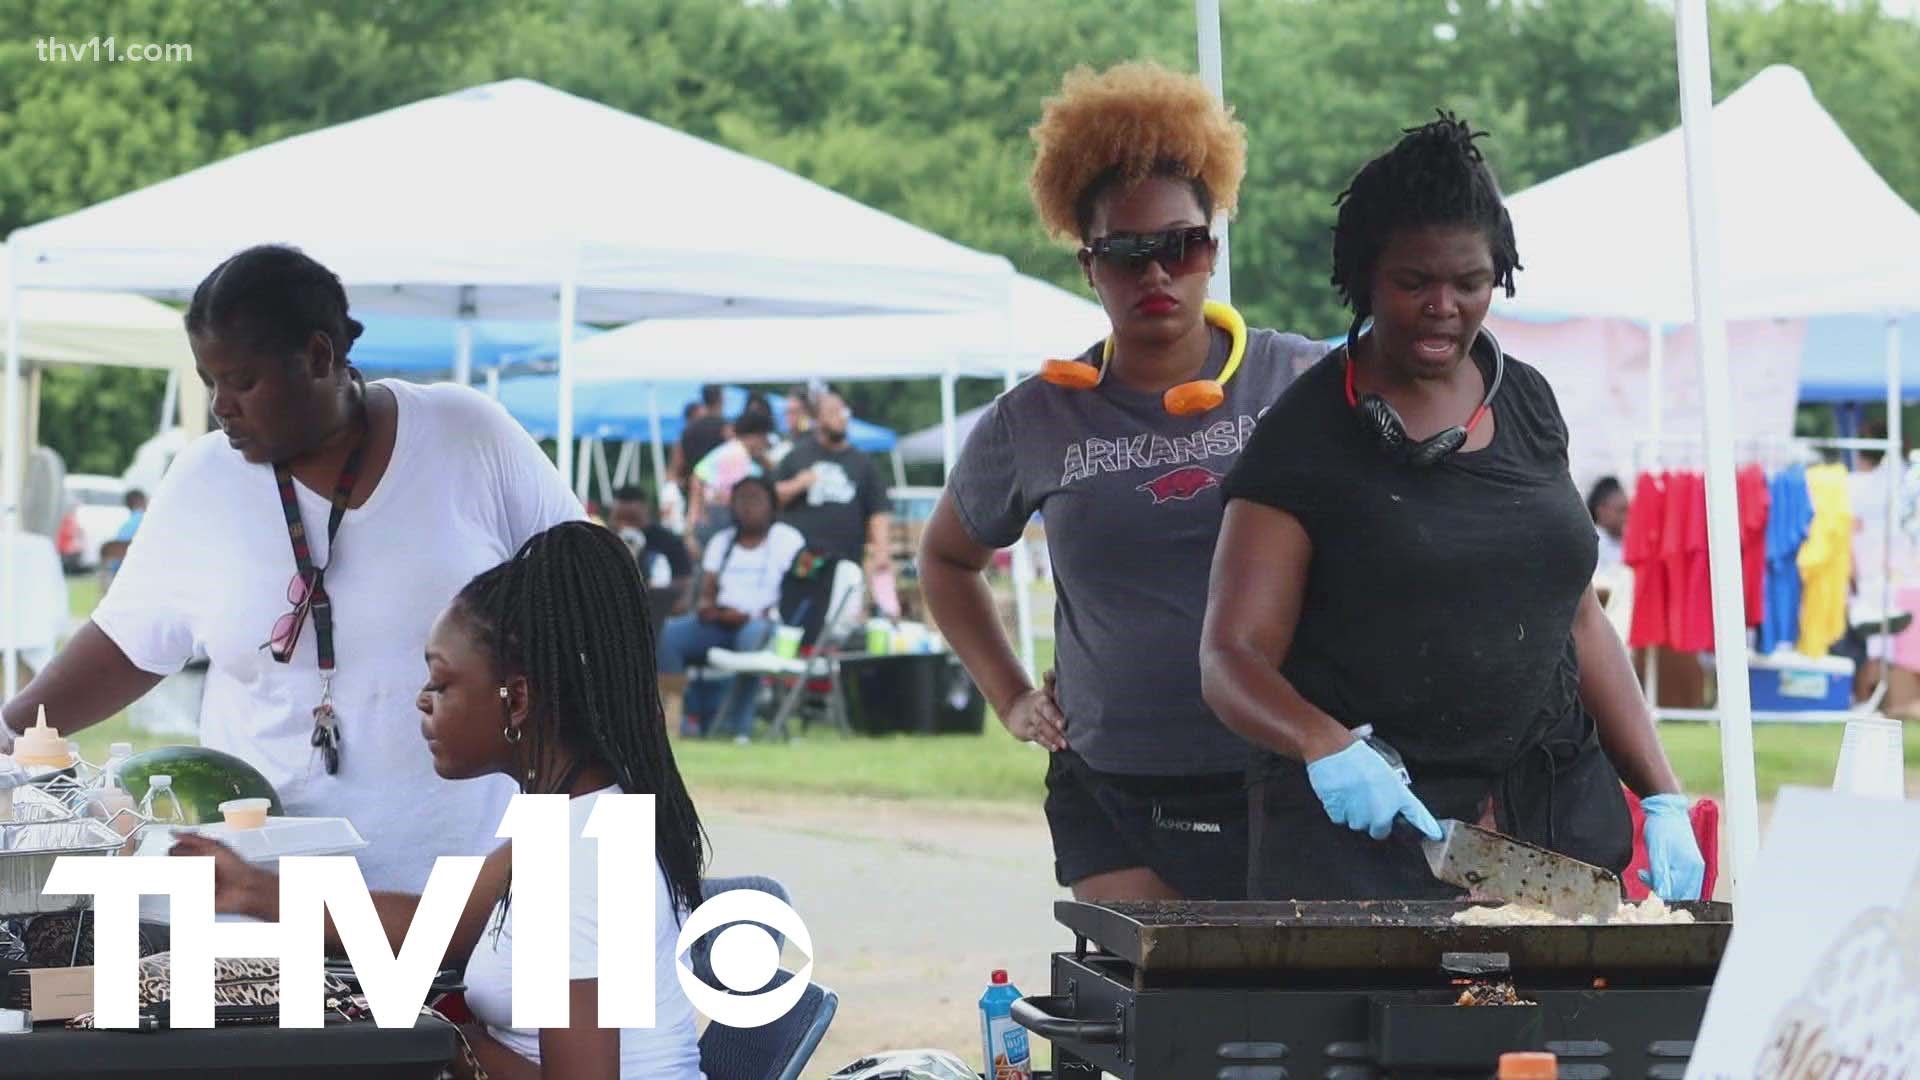 Last year, Juneteenth became a federal holiday celebrated by all. It was also the first year that Juneteenth Arkansas held their festival event.